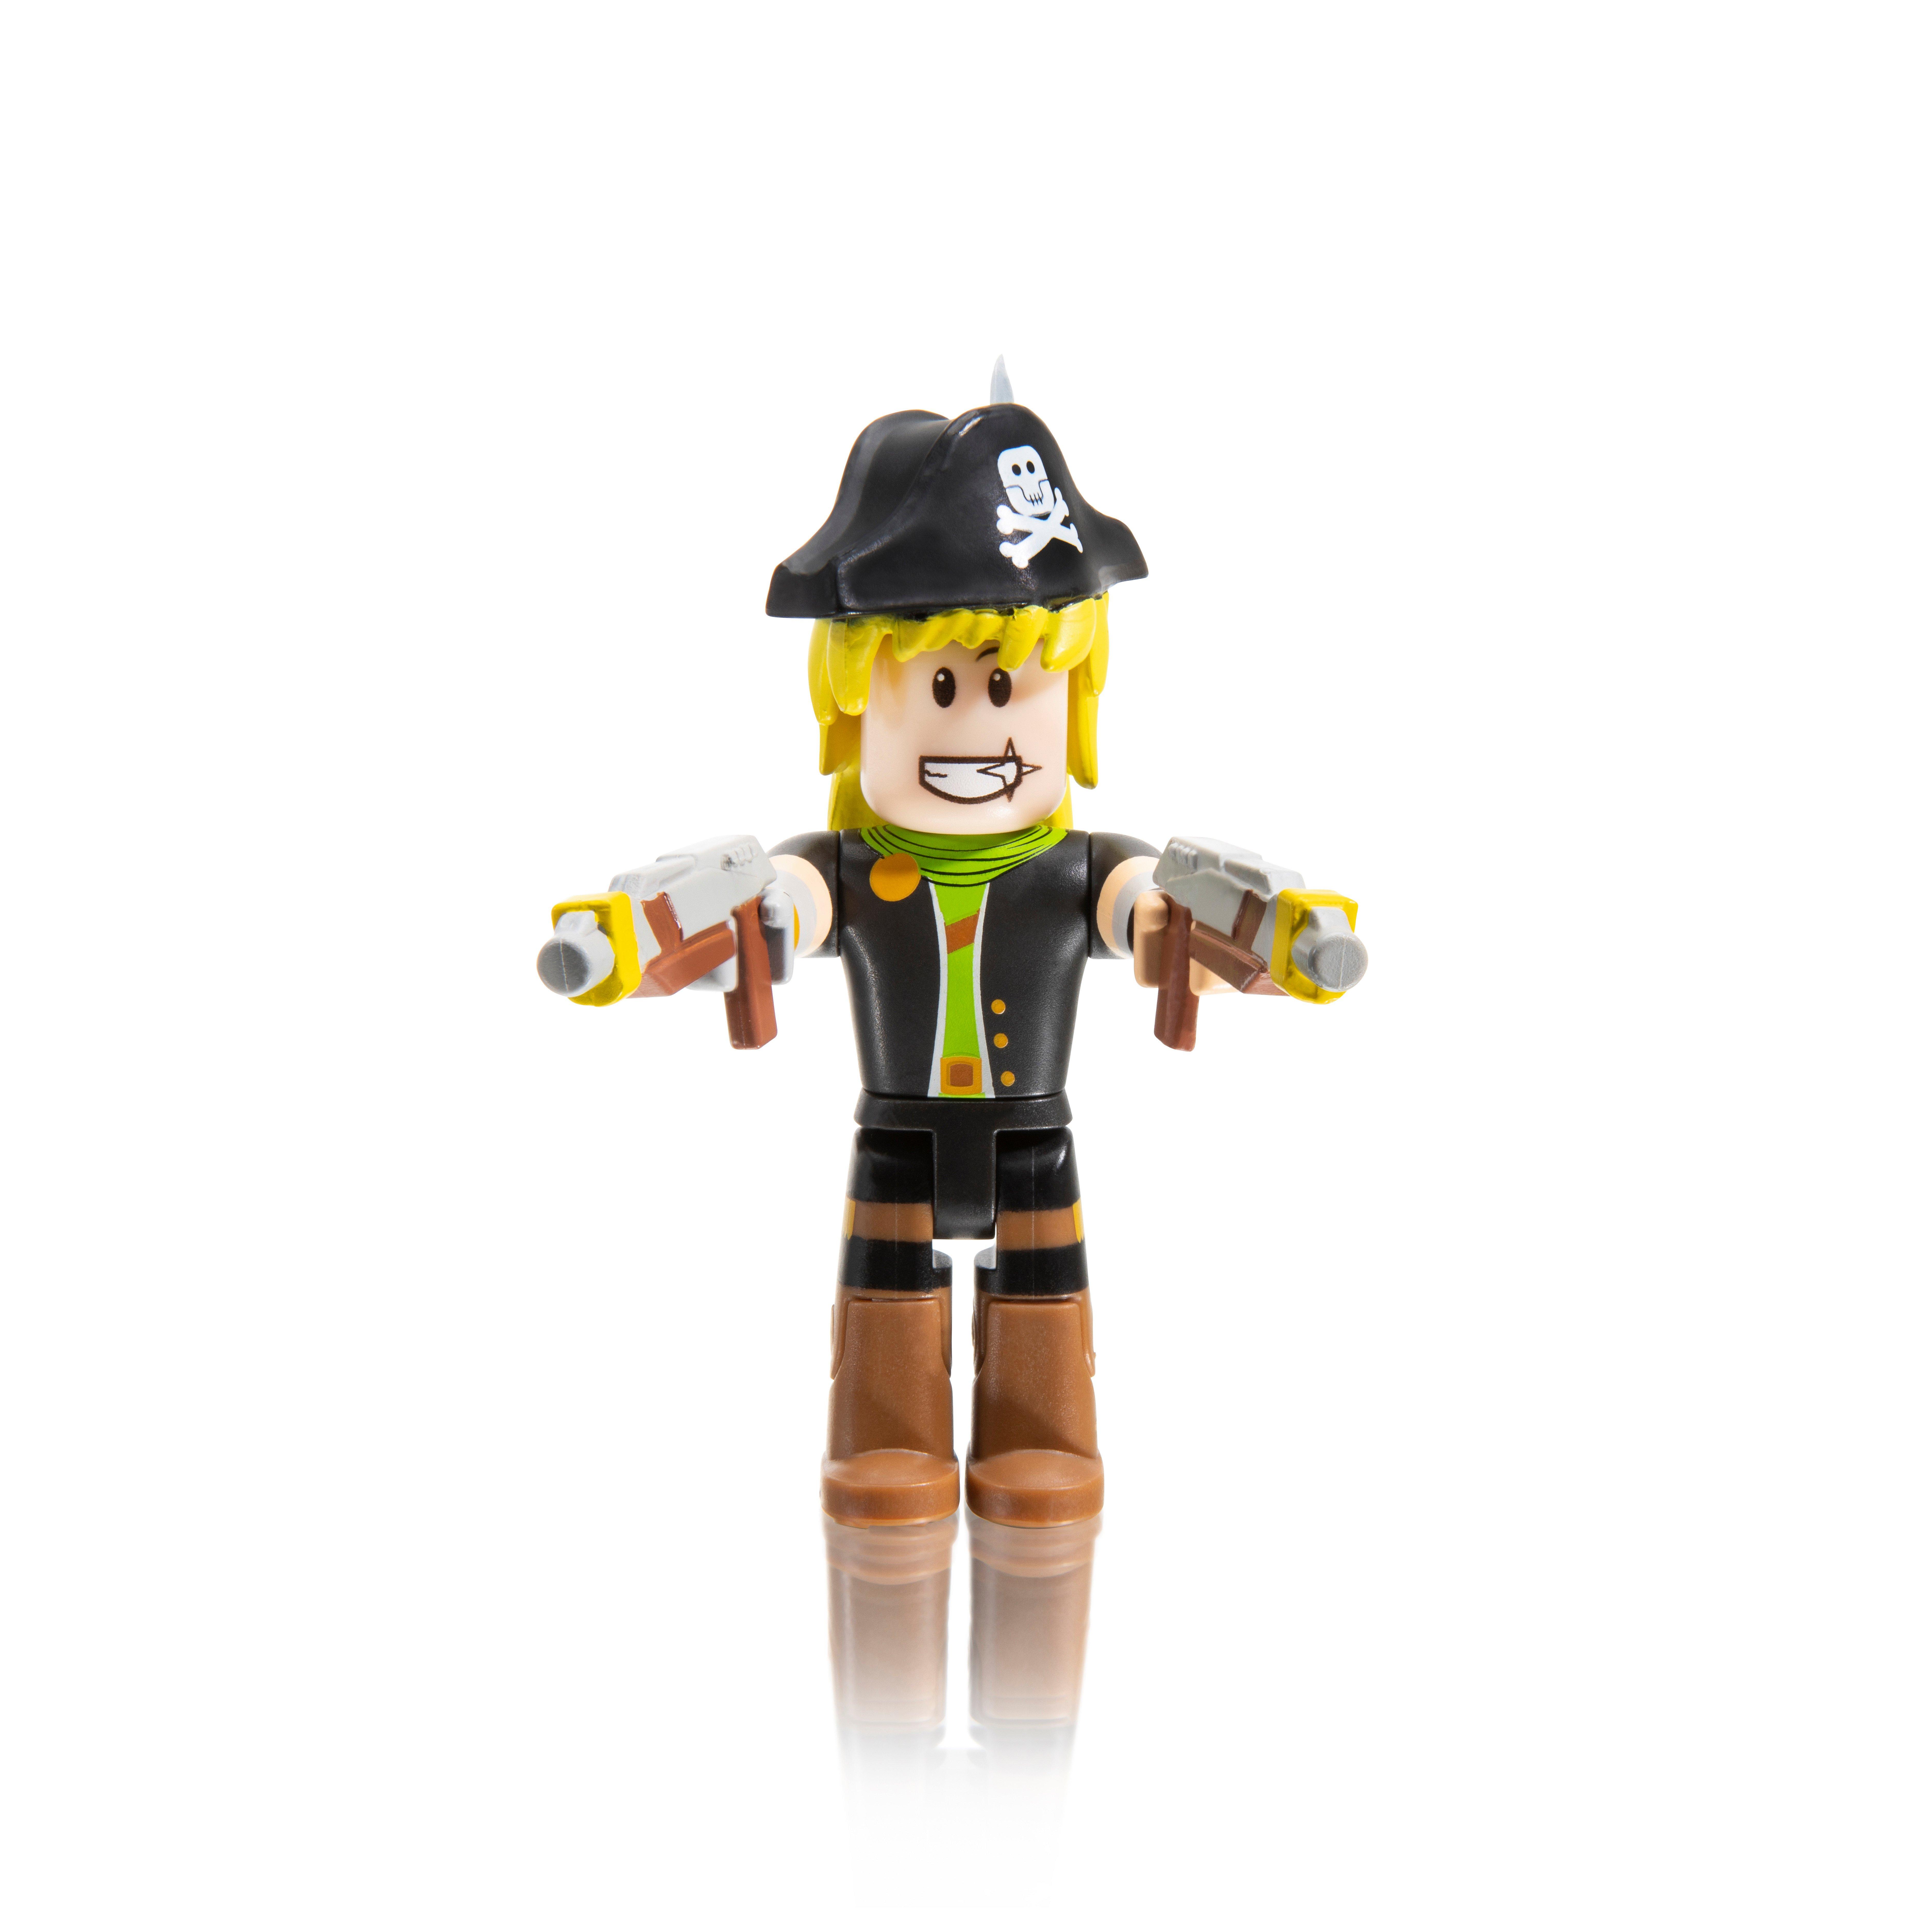 Roblox Action Collection Series 7 Mystery Figure Includes 1 Figure And Exclusive Virtual Item Gamestop - roblox toys series 7 list